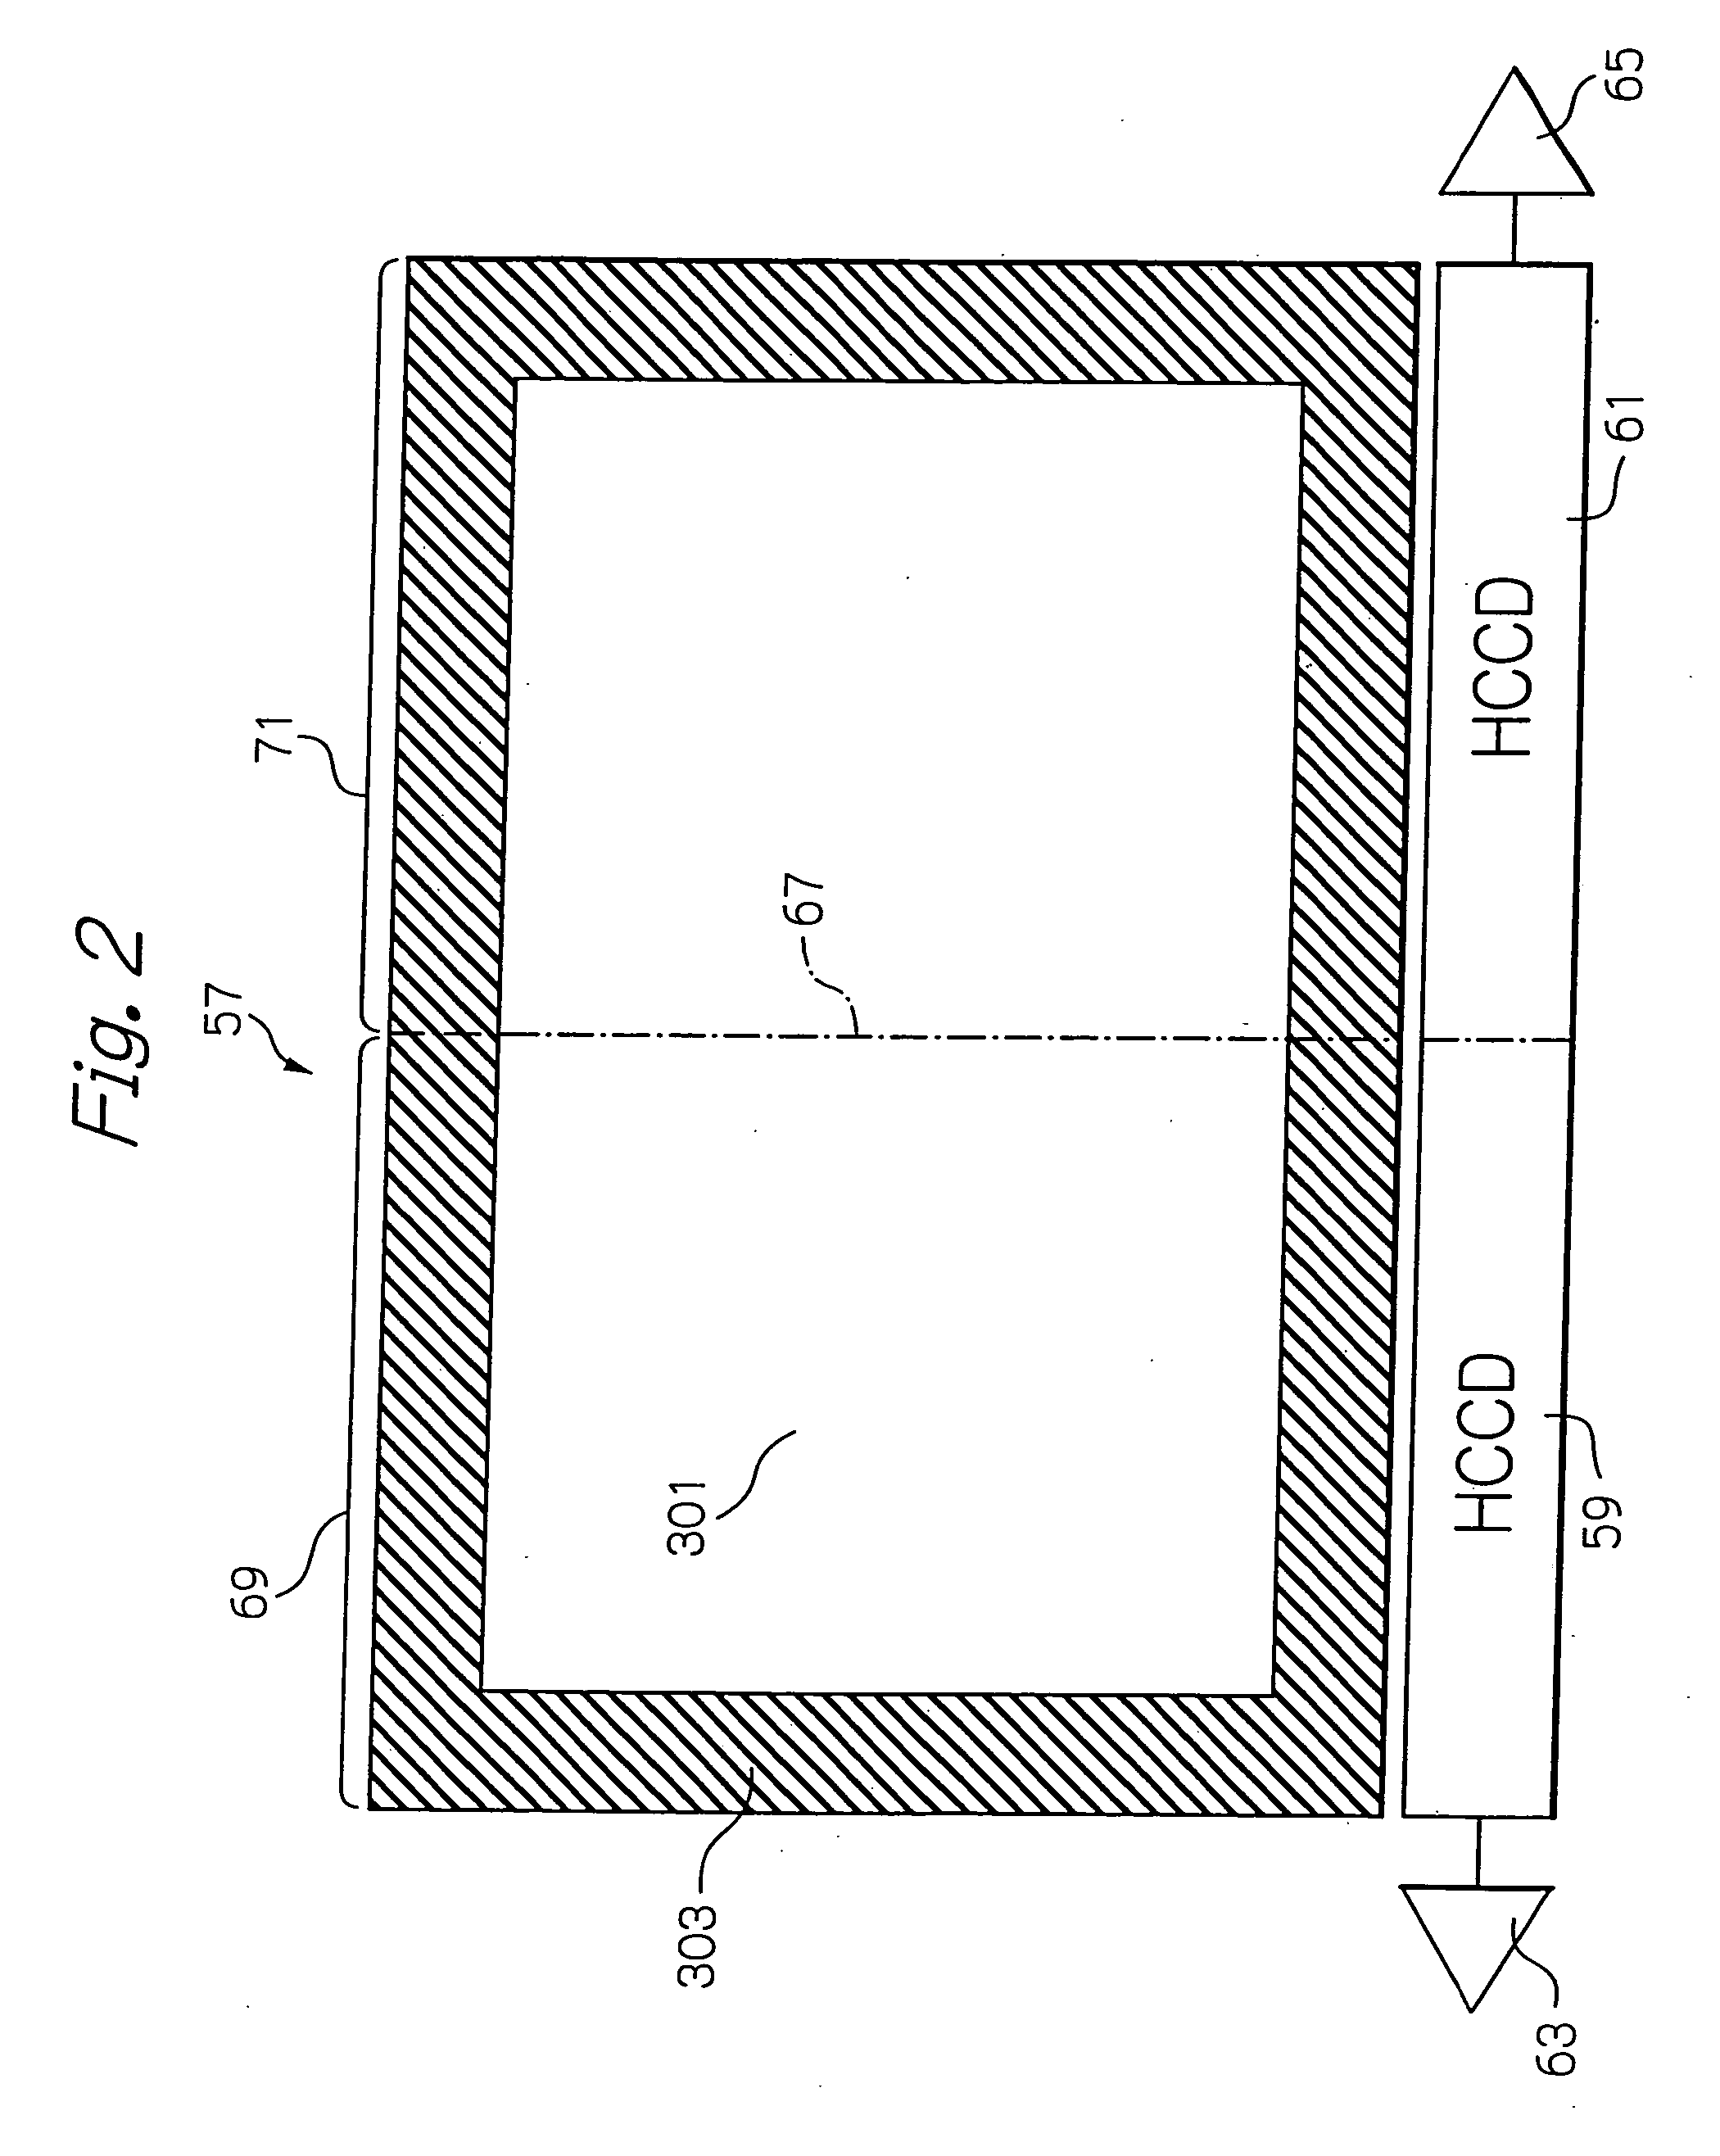 Digital camera for producing a frame of image formed by two areas with its seam compensated for